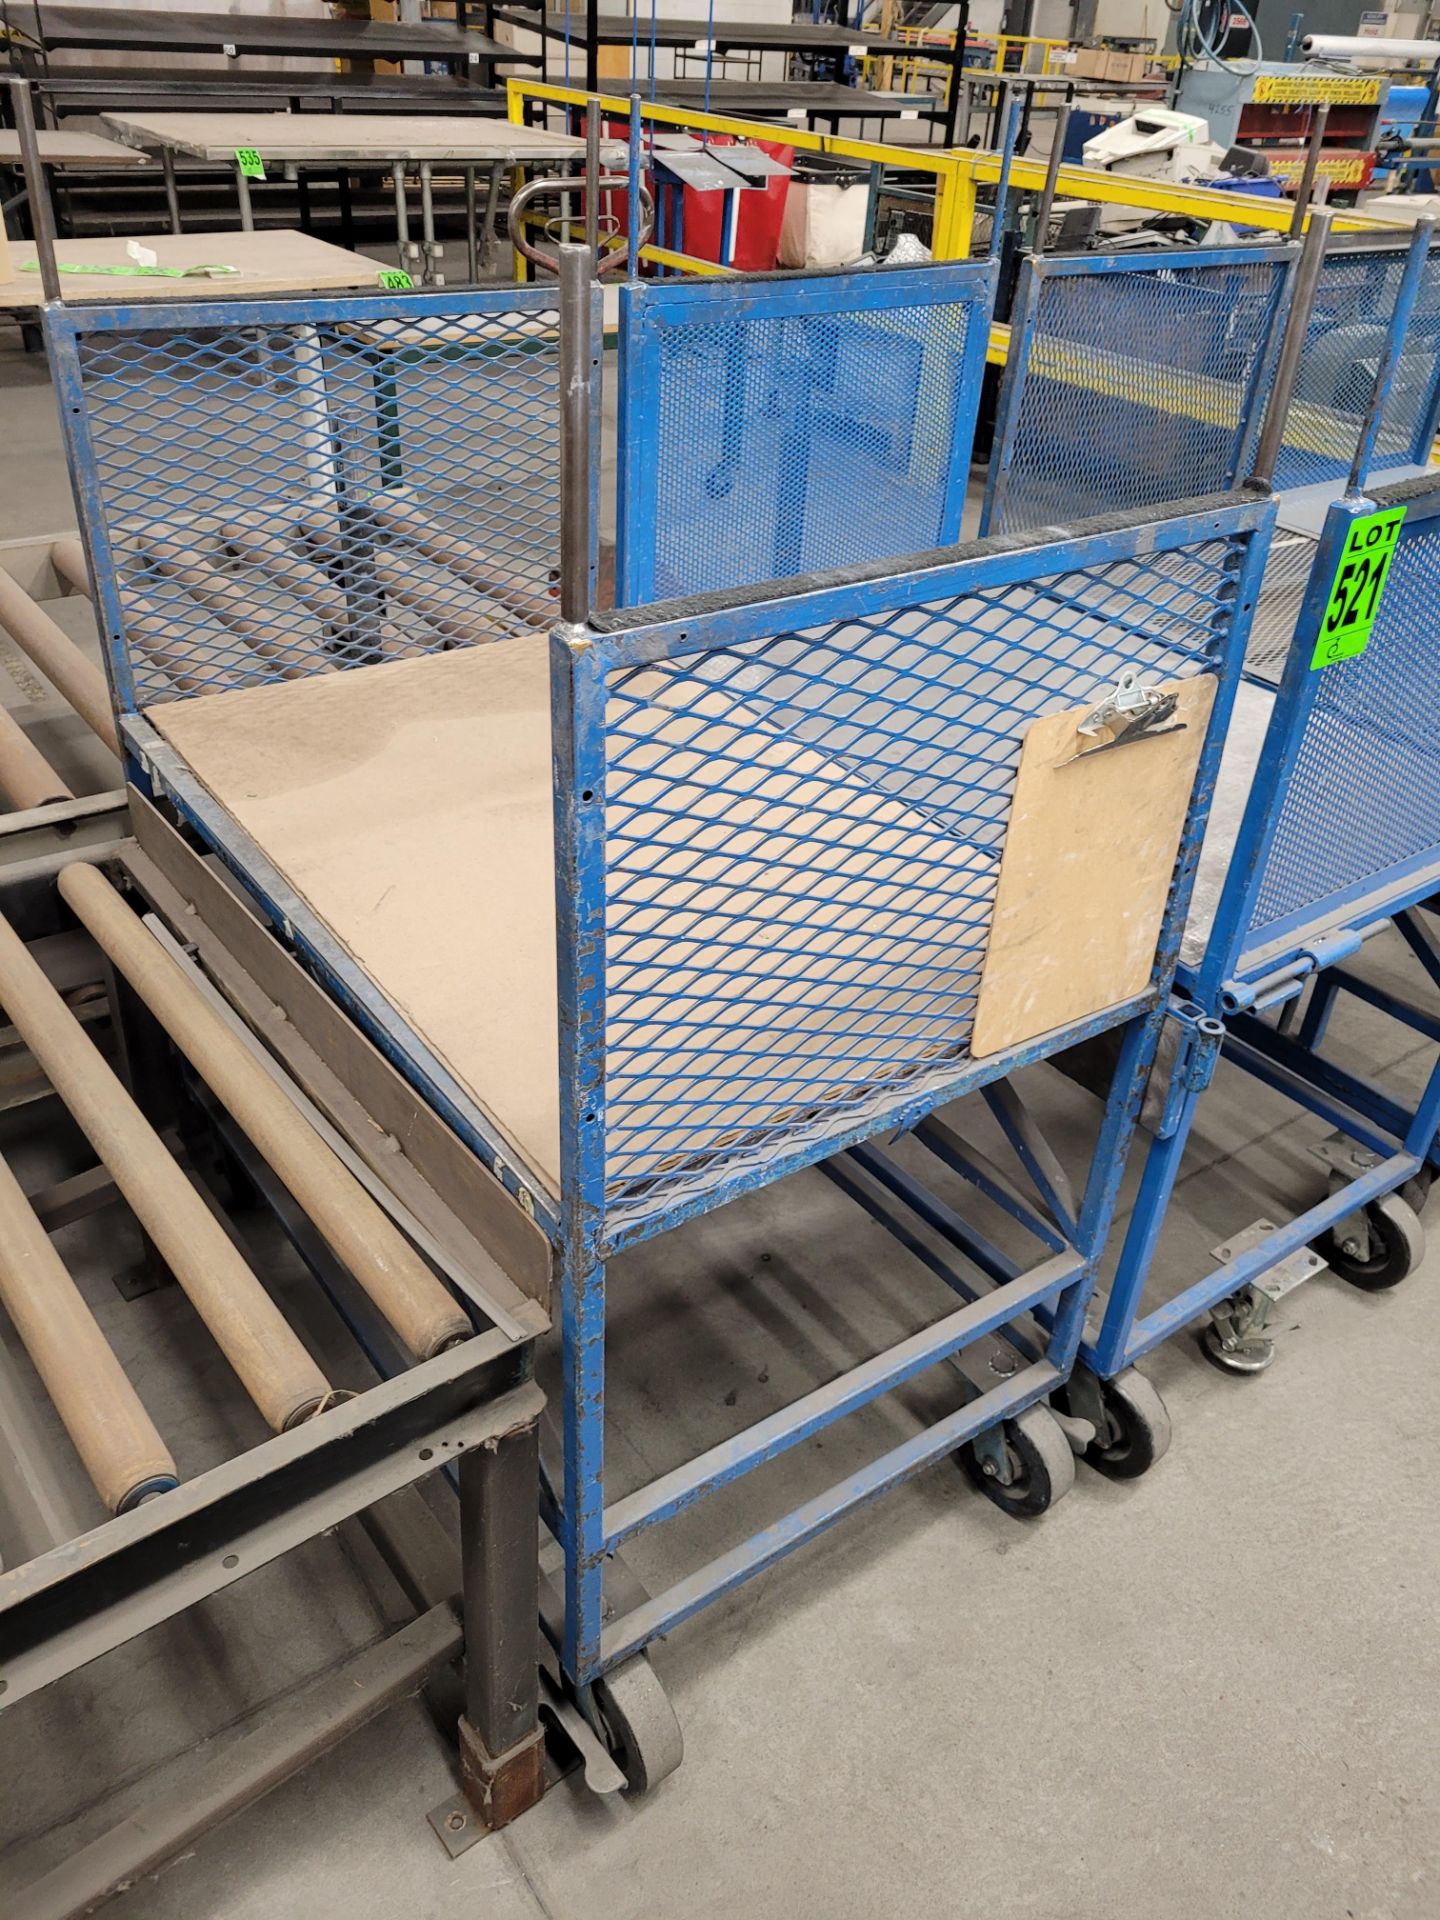 Lot of (2) steel-lattice carts w/handles, casters, wheel lock, (1) w/expandable sides - Image 3 of 3